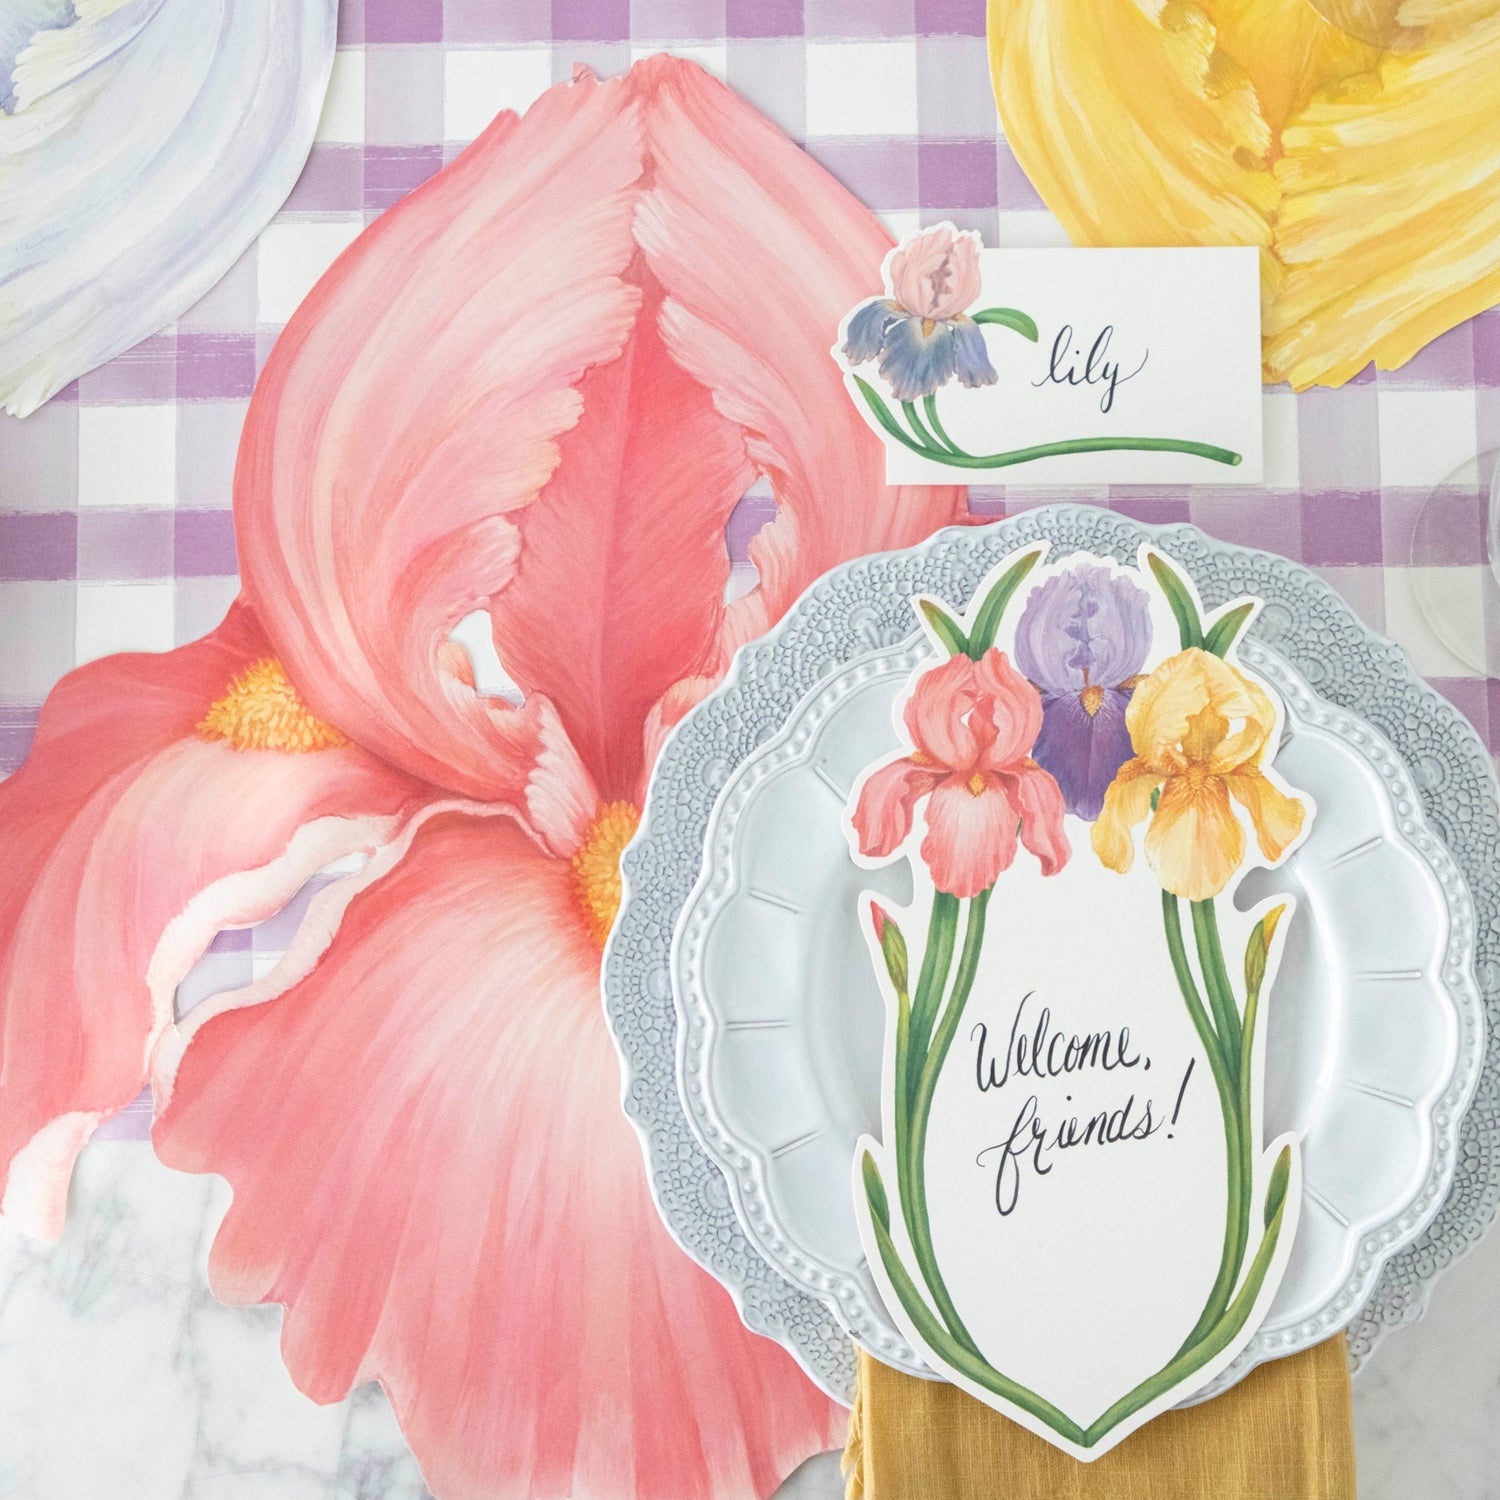 The pink Die-cut Iris Placemat under a vibrant springtime place setting, from above.